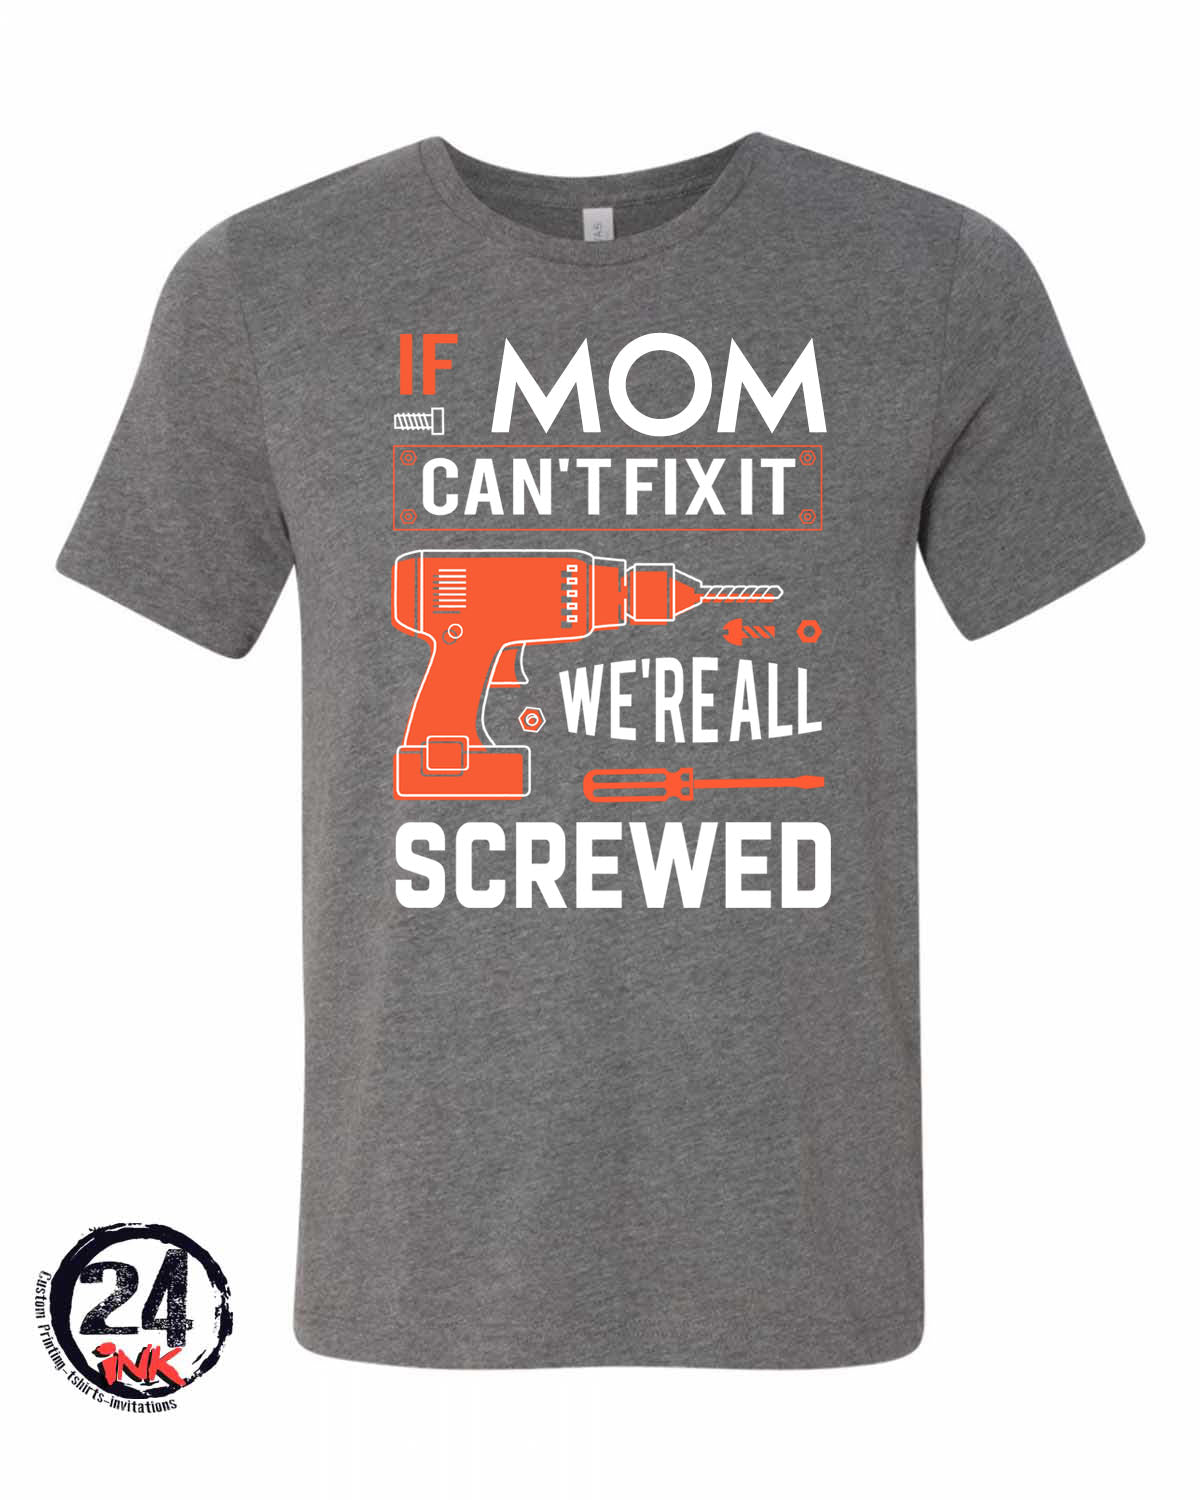 If mom can't fix it T-Shirt